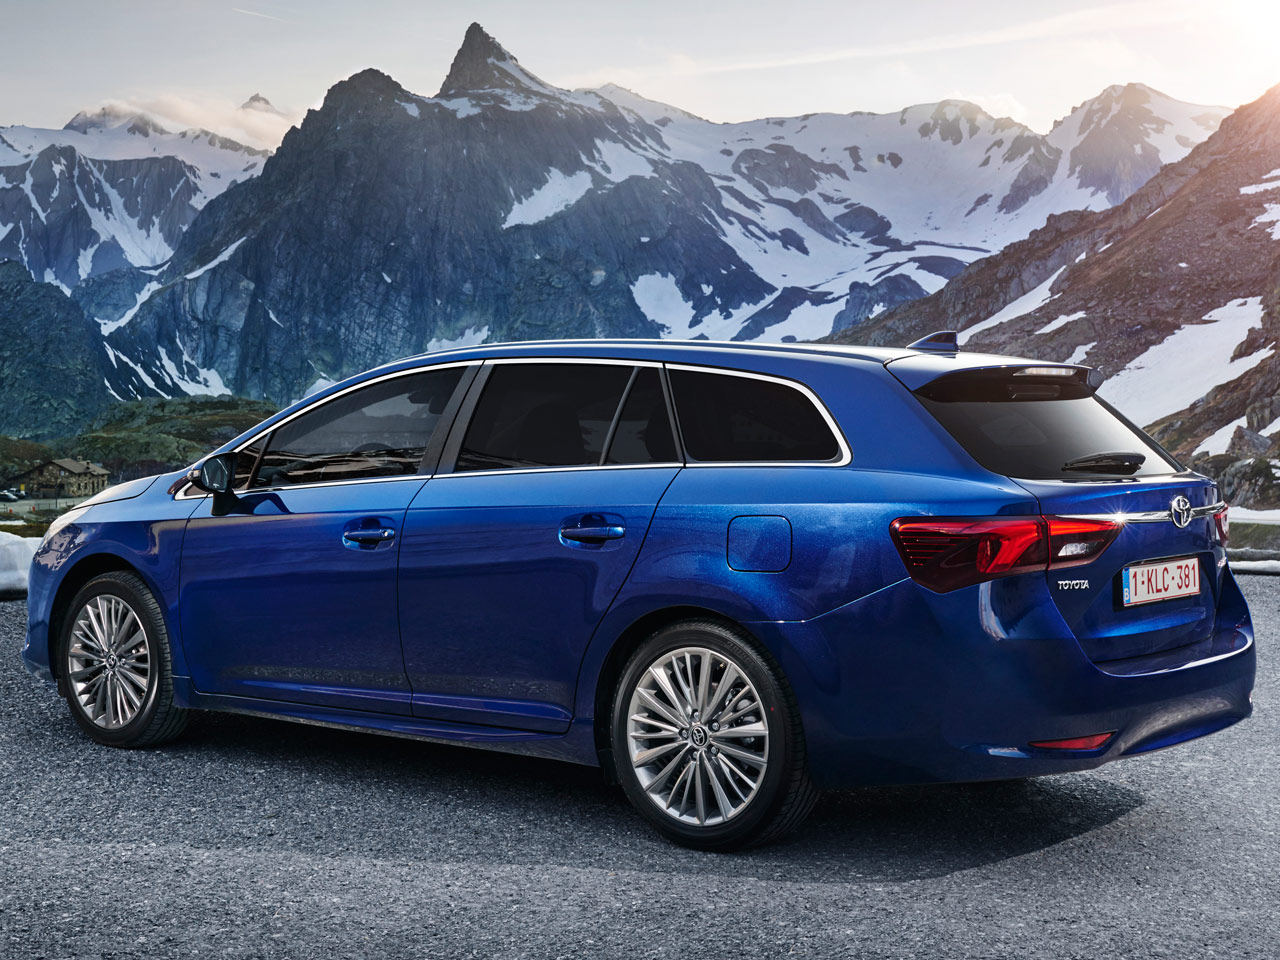 Toyota Avensis Touring Sports 2.0 D-4D: Test